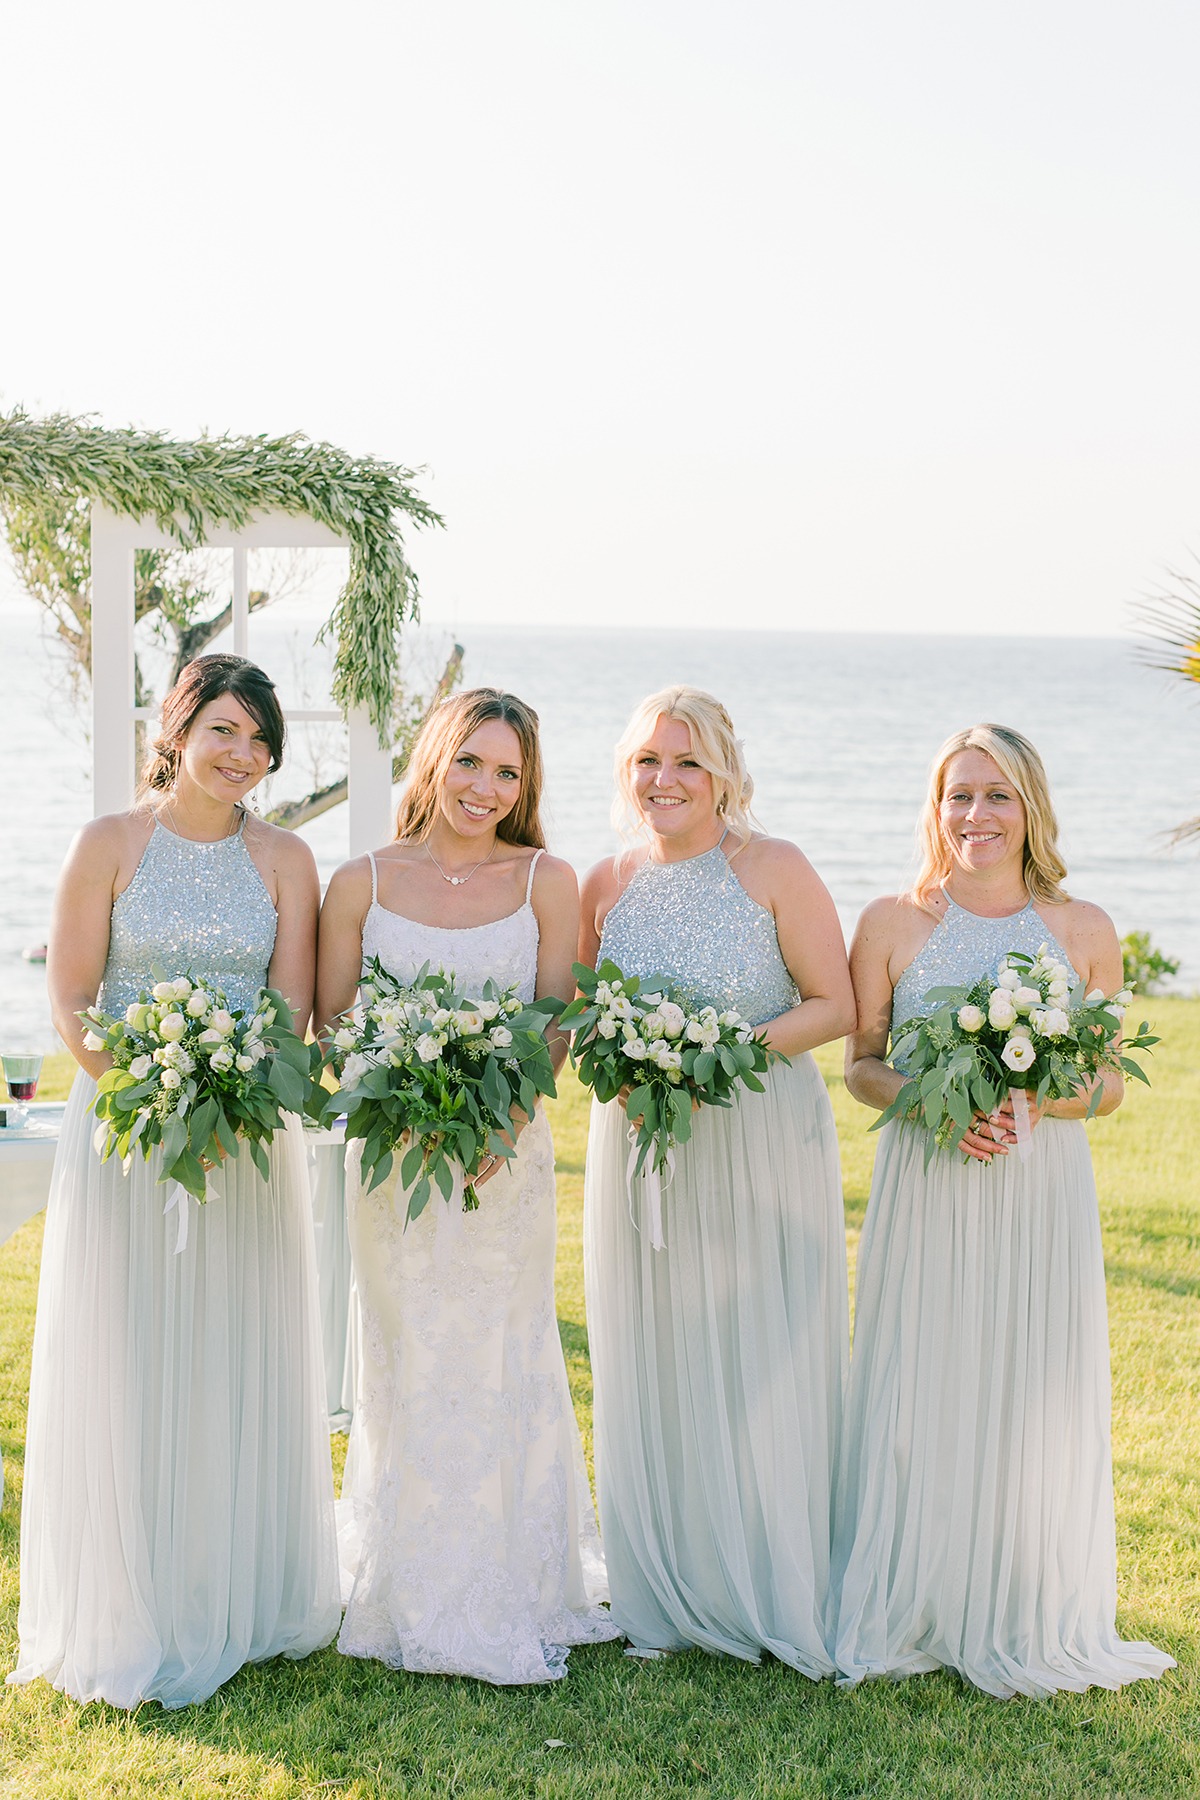 Bridesmaids in silver sparkly dresses